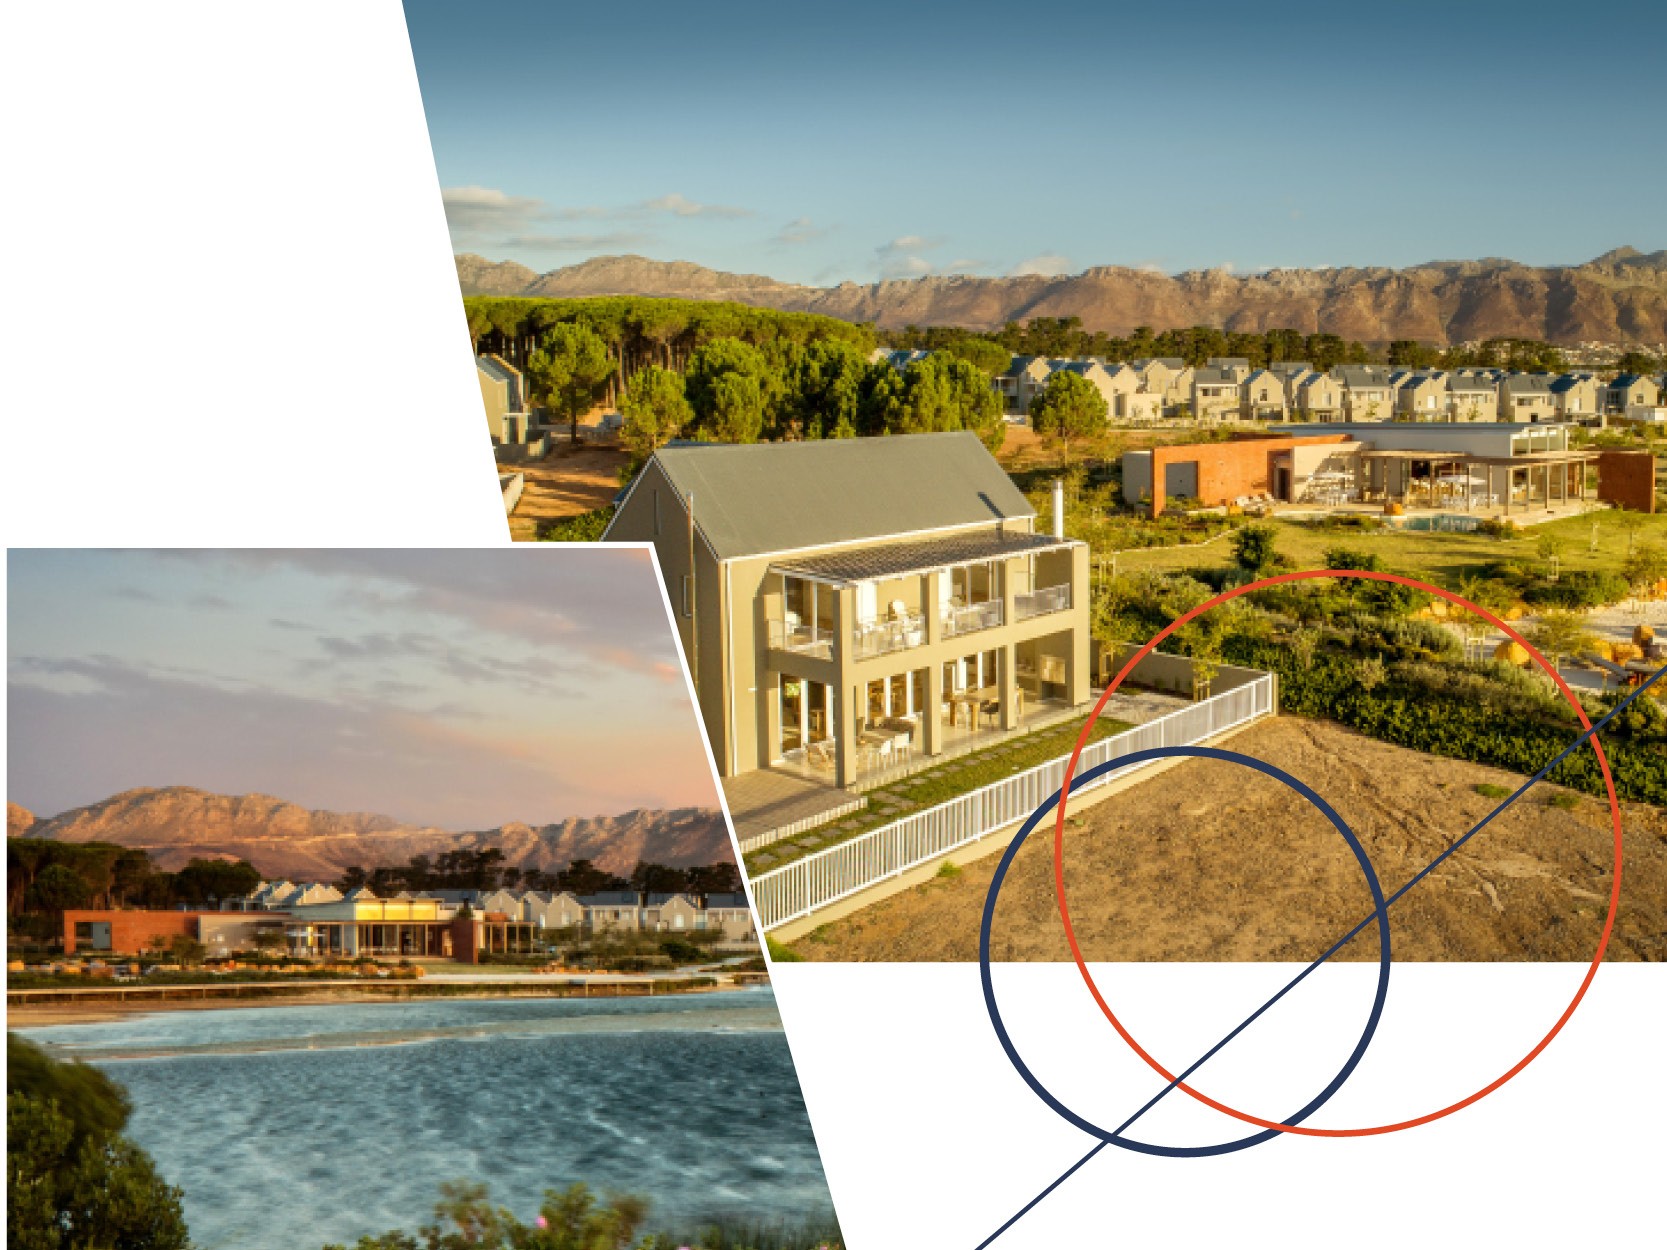 Millennials entering the market drive developer demand. The clamour for homes in the R 1.5 million to R 2 million price bracket is growing. More property developers are expected to target this market in 2018 to take advantage of the trend, predominantly driven by first-time buyers under the age of 35.